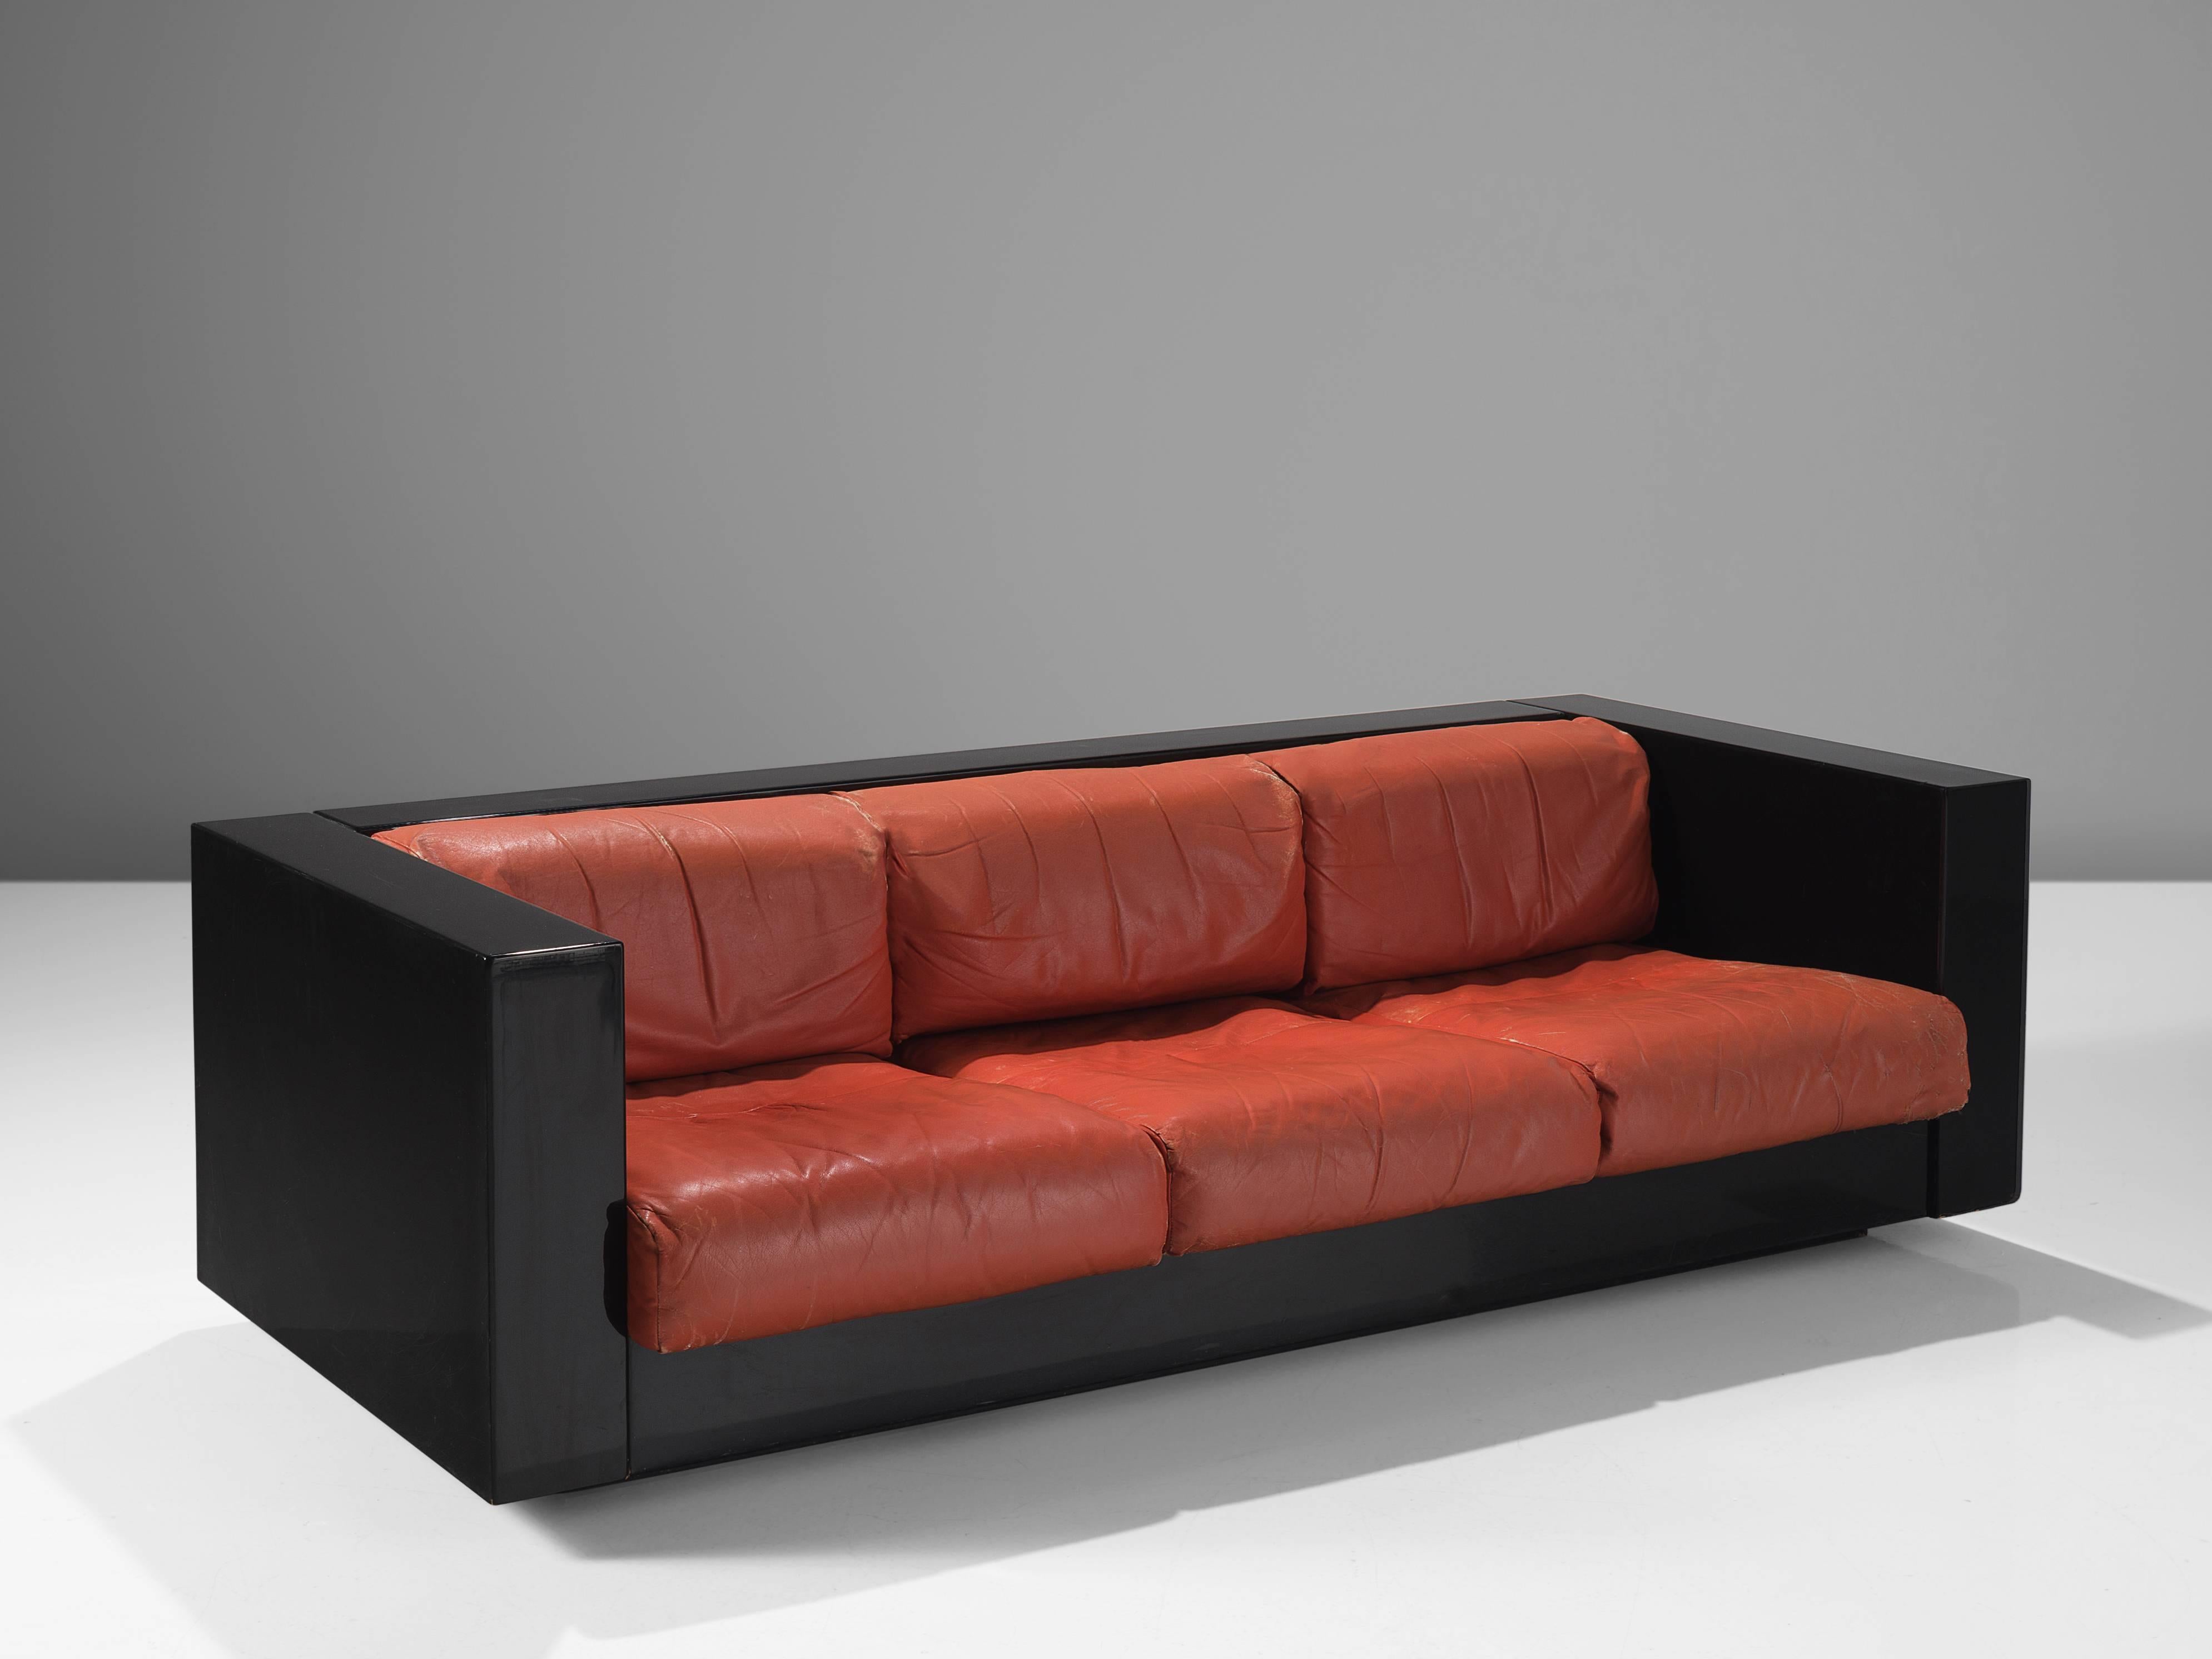 Massimo and Lella Vignelli for Poltronova, wood and leather, Italy, 1964. 

This sofa 'Sartoga' is by Italian designer couple Lella & Massimo Vignelli. The Vignelli's were known for their clear designs, the piece is completely free from decorative